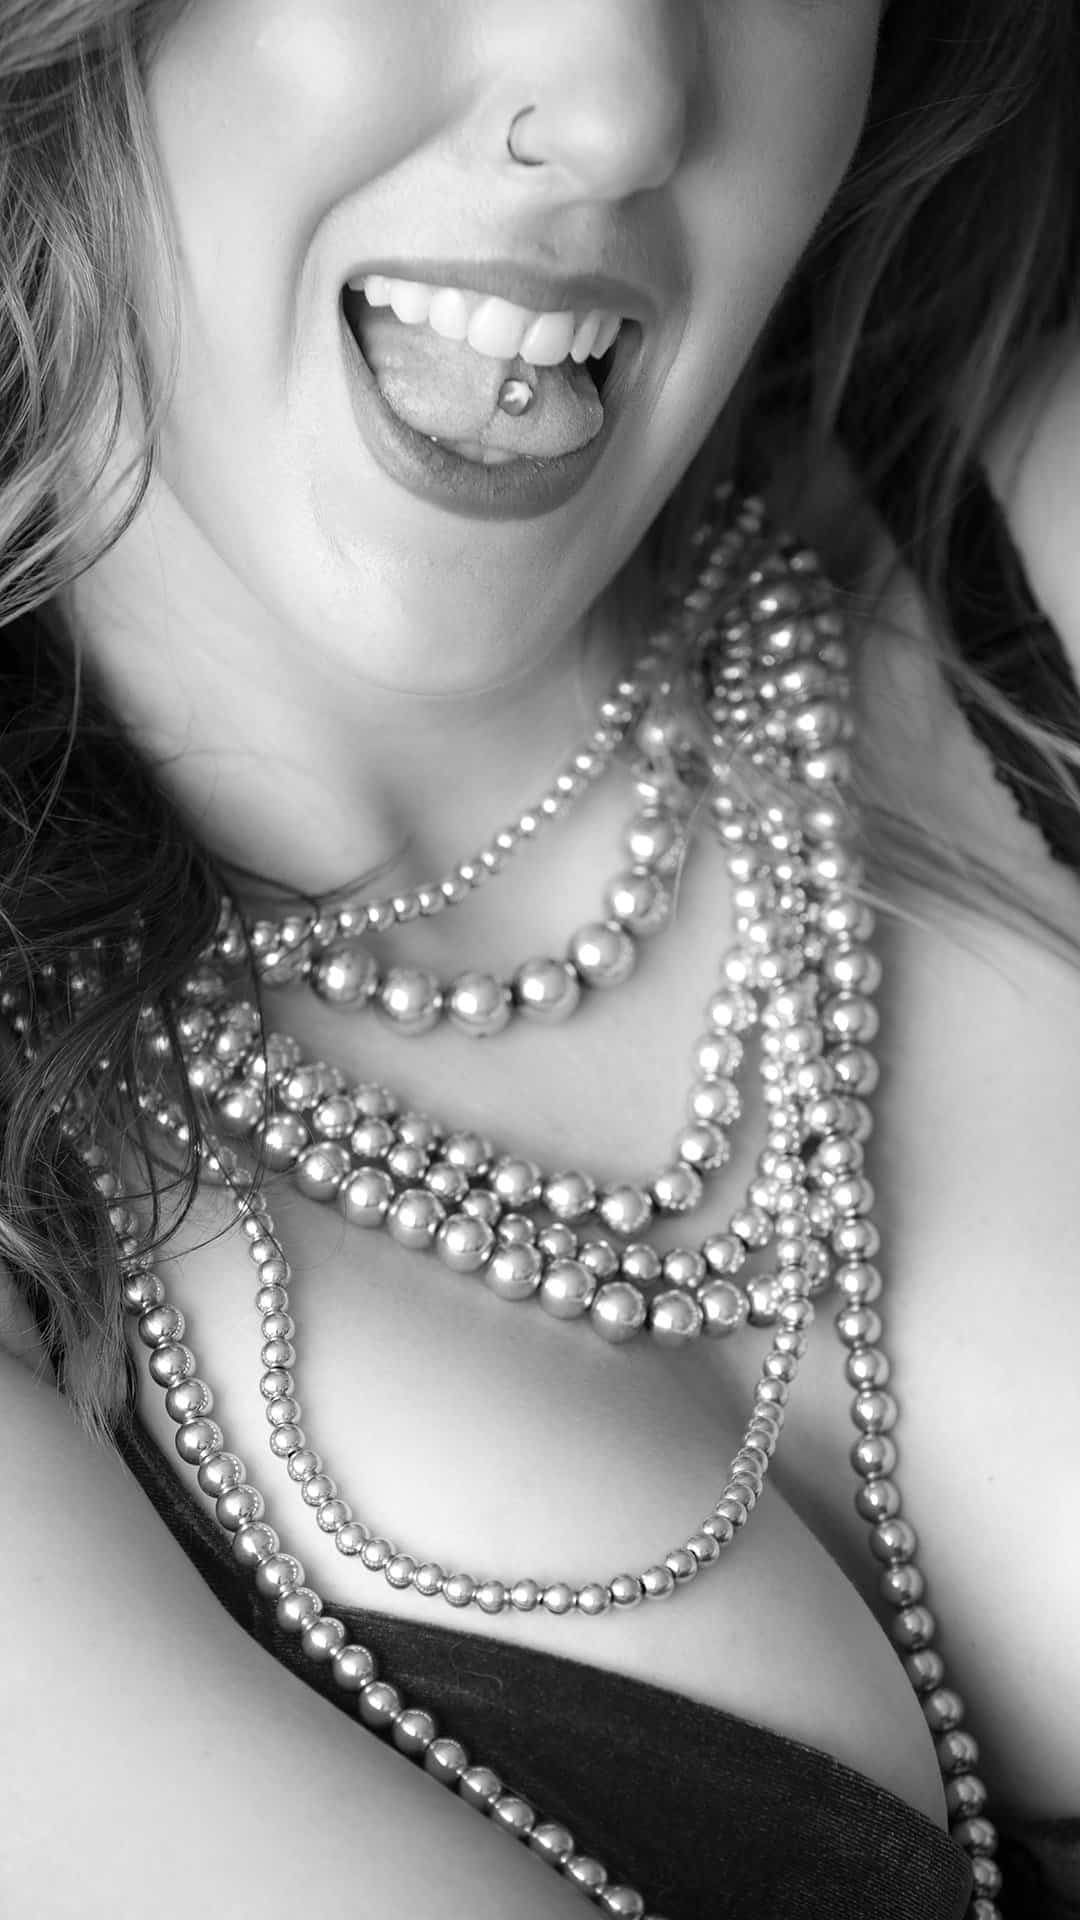 boudoir image of woman draped in pearls, showing off a tongue stud